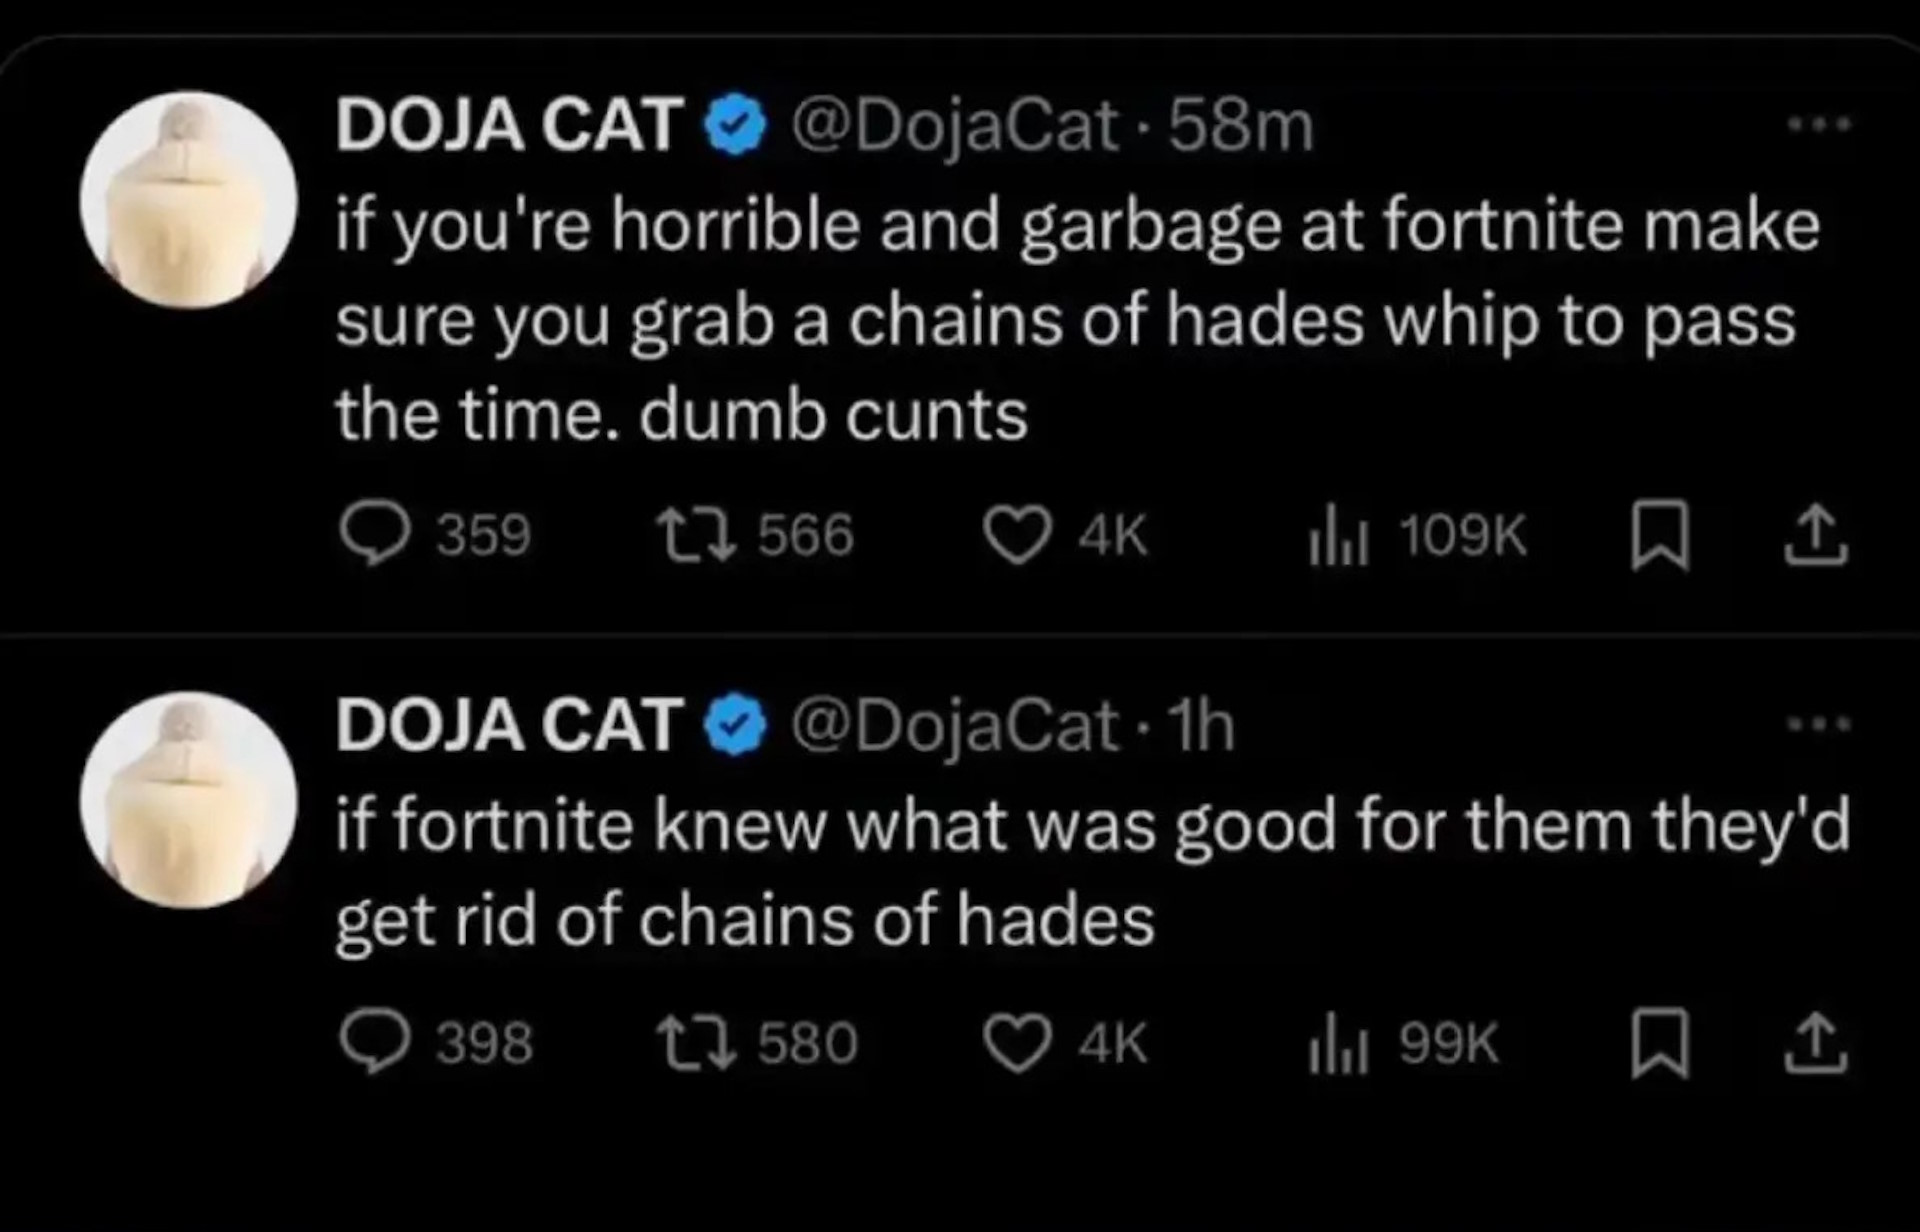 if you're horrible and garbage at fortnite make sure you grab a chains of hades whip to pass the time. dumb cunts. if fortnite knew what was good for them they'd get rid of chains of hades